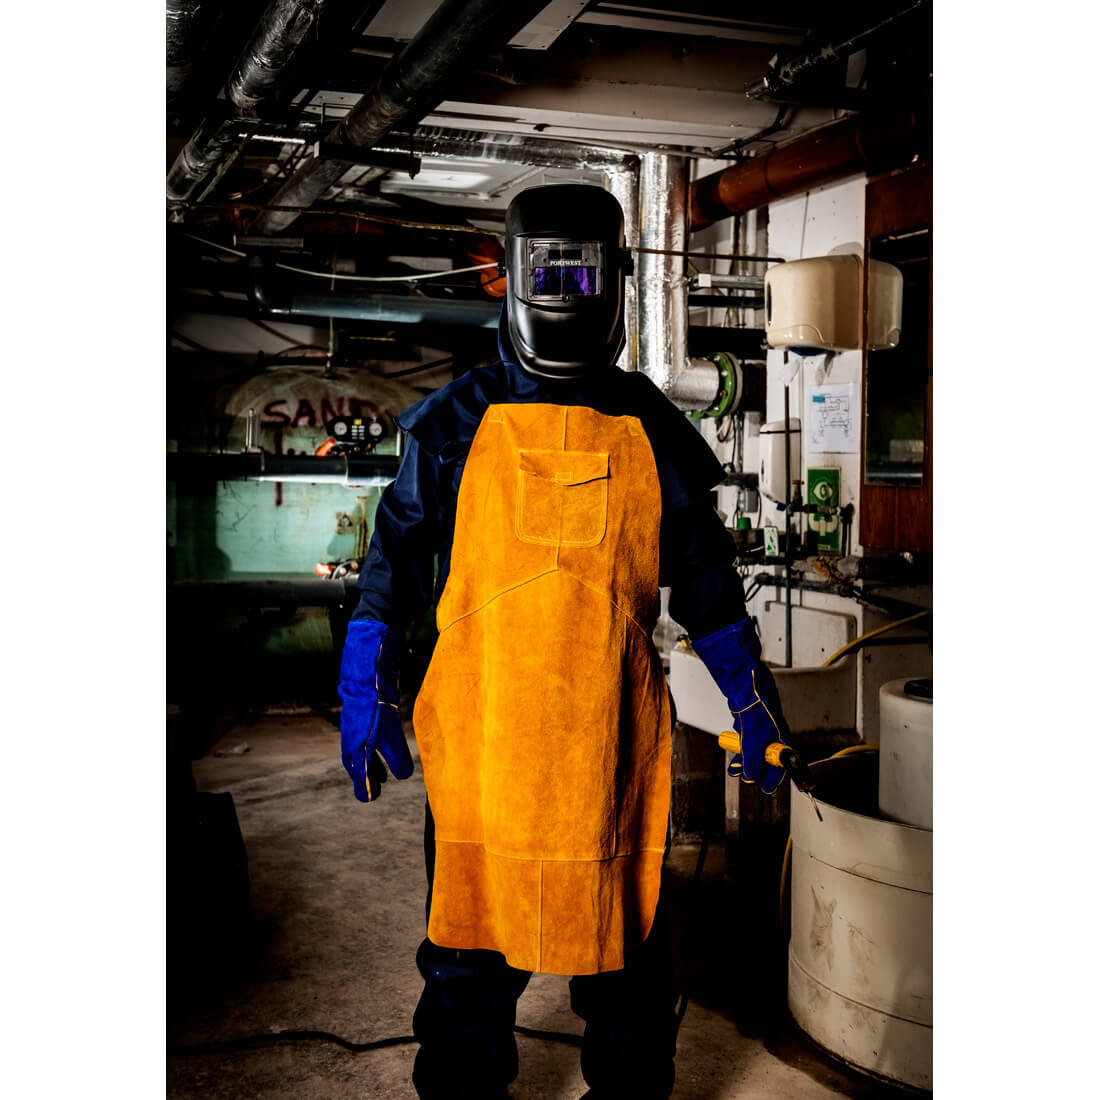 Leather Welding Apron - Personal protection